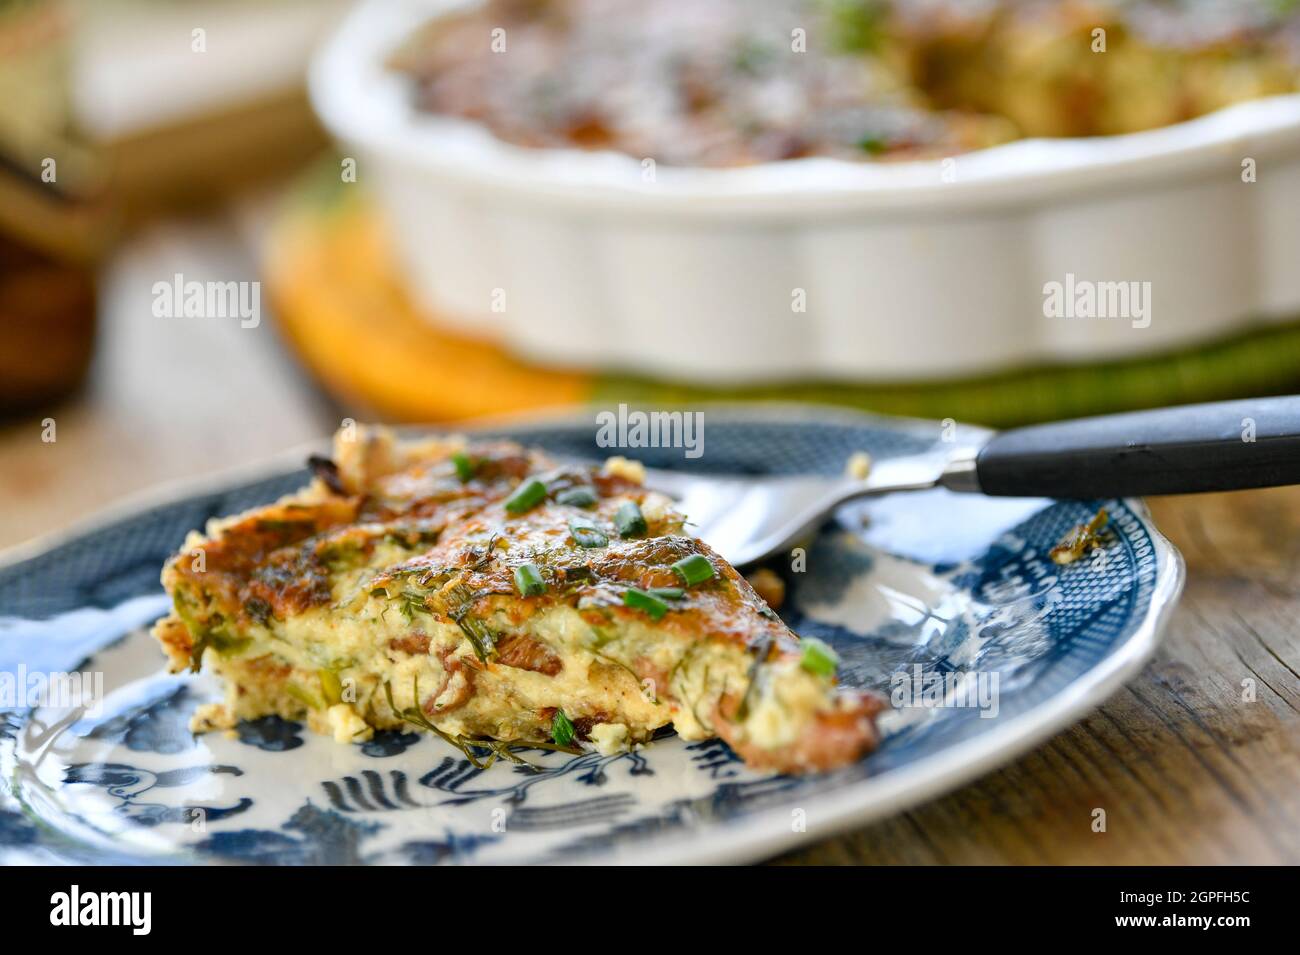 Swedish Cheese Pie made with Vasterbotten cheese, chanterelles, dill and chives. Photo: Johan Nilsson / TT / Code 50090 Stock Photo